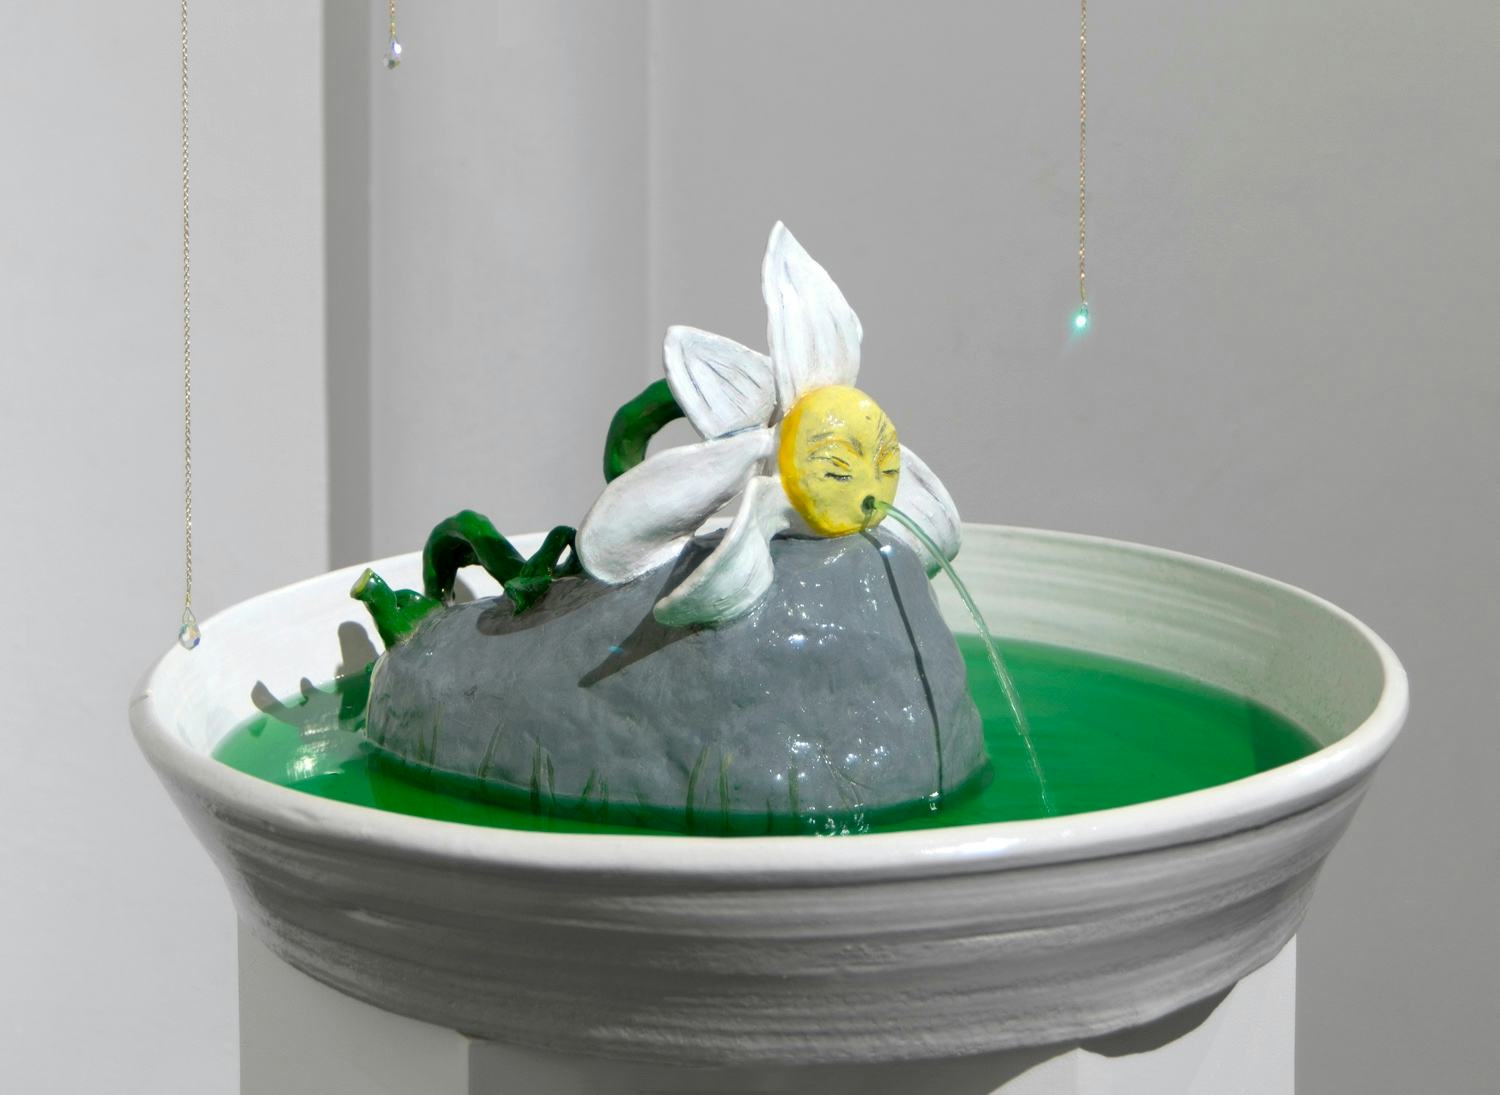 Plucked: The Fountain (2017)
Glazed ceramic, green water, water pump, chain, crystals